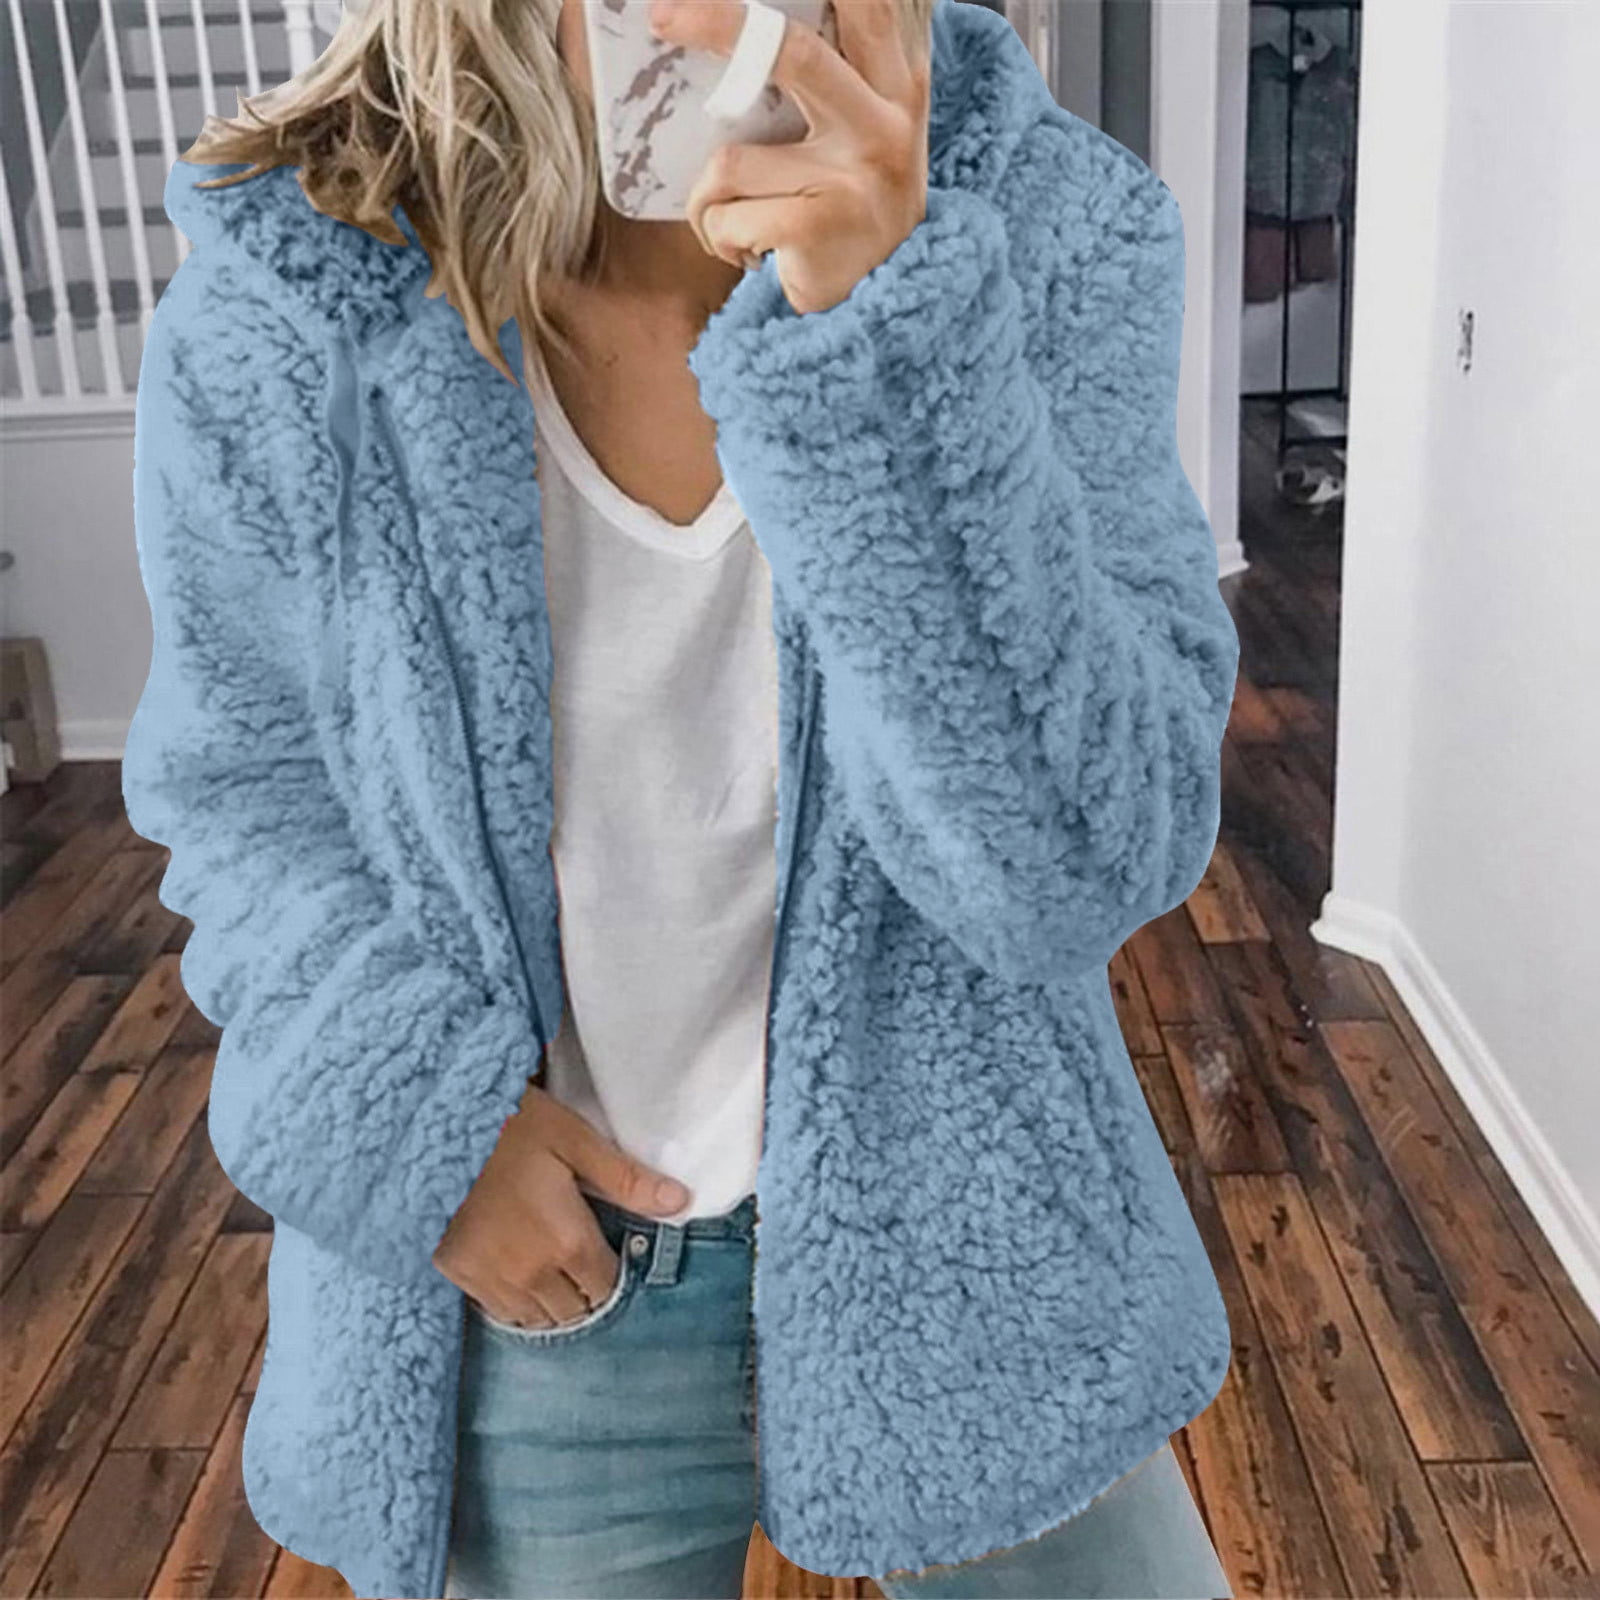 jacket, sweater, grey sweater, fluffy, pullover, fluffy knit